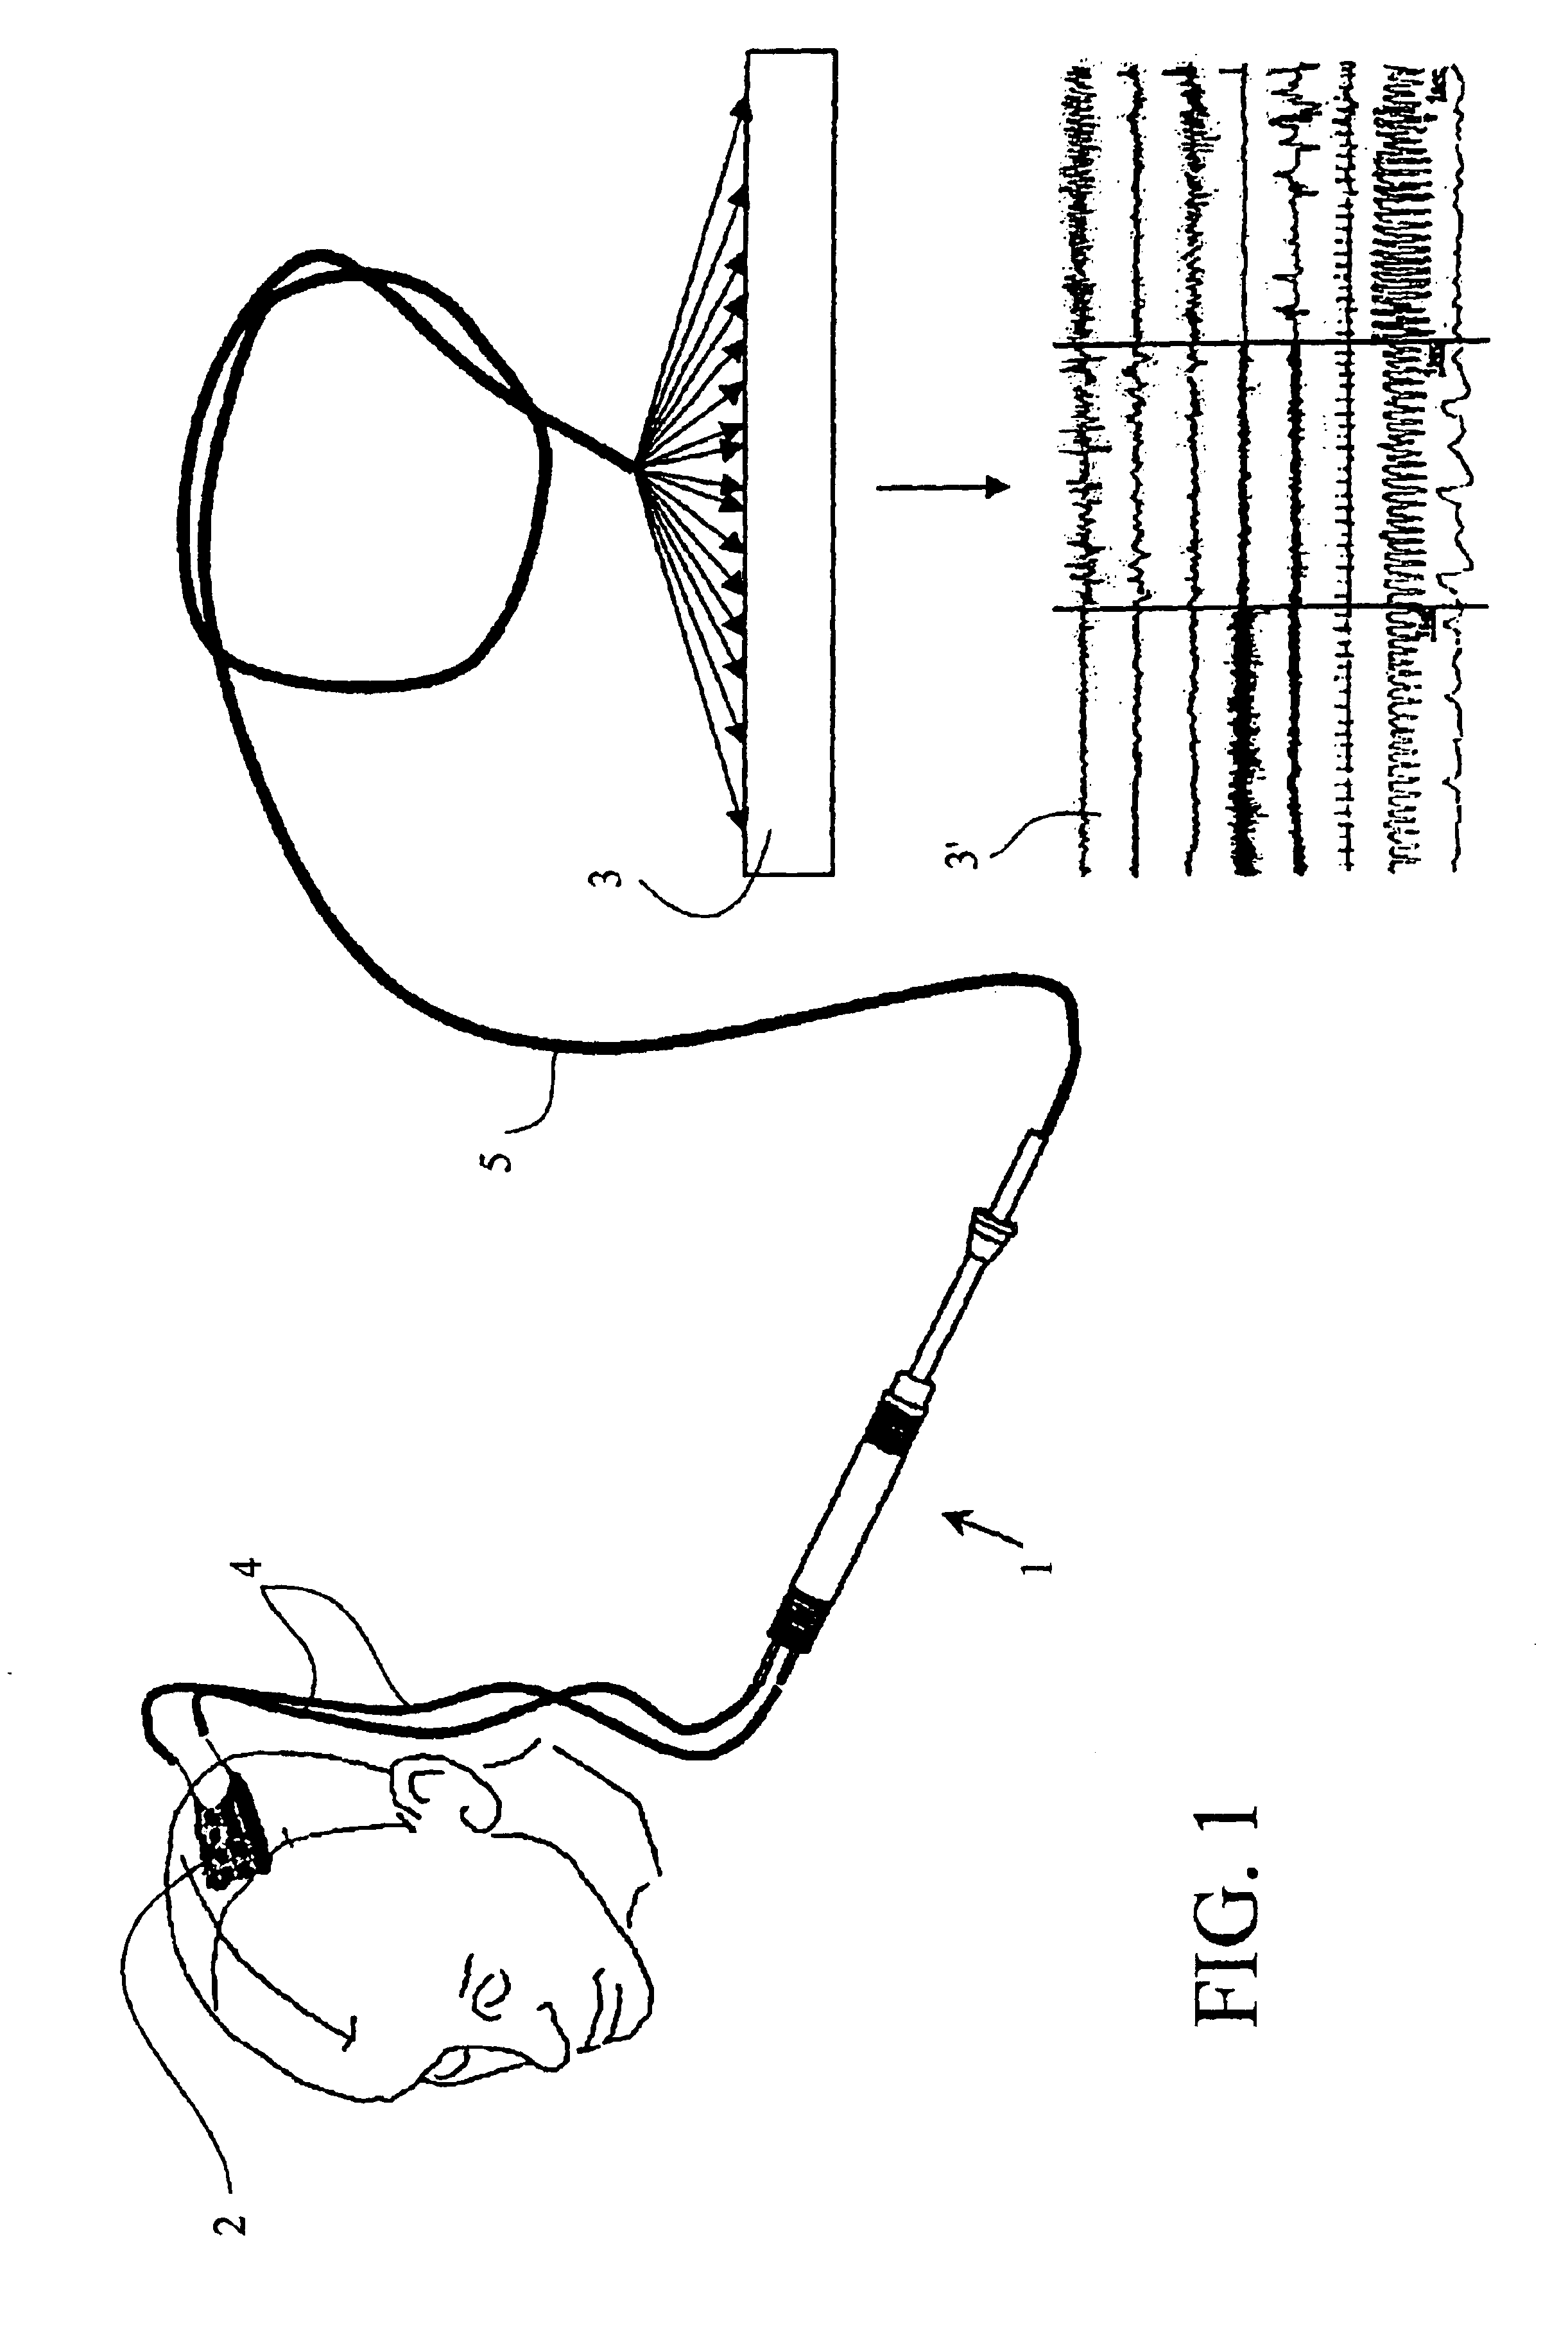 Multi-contact connector for electrode for example for medical use